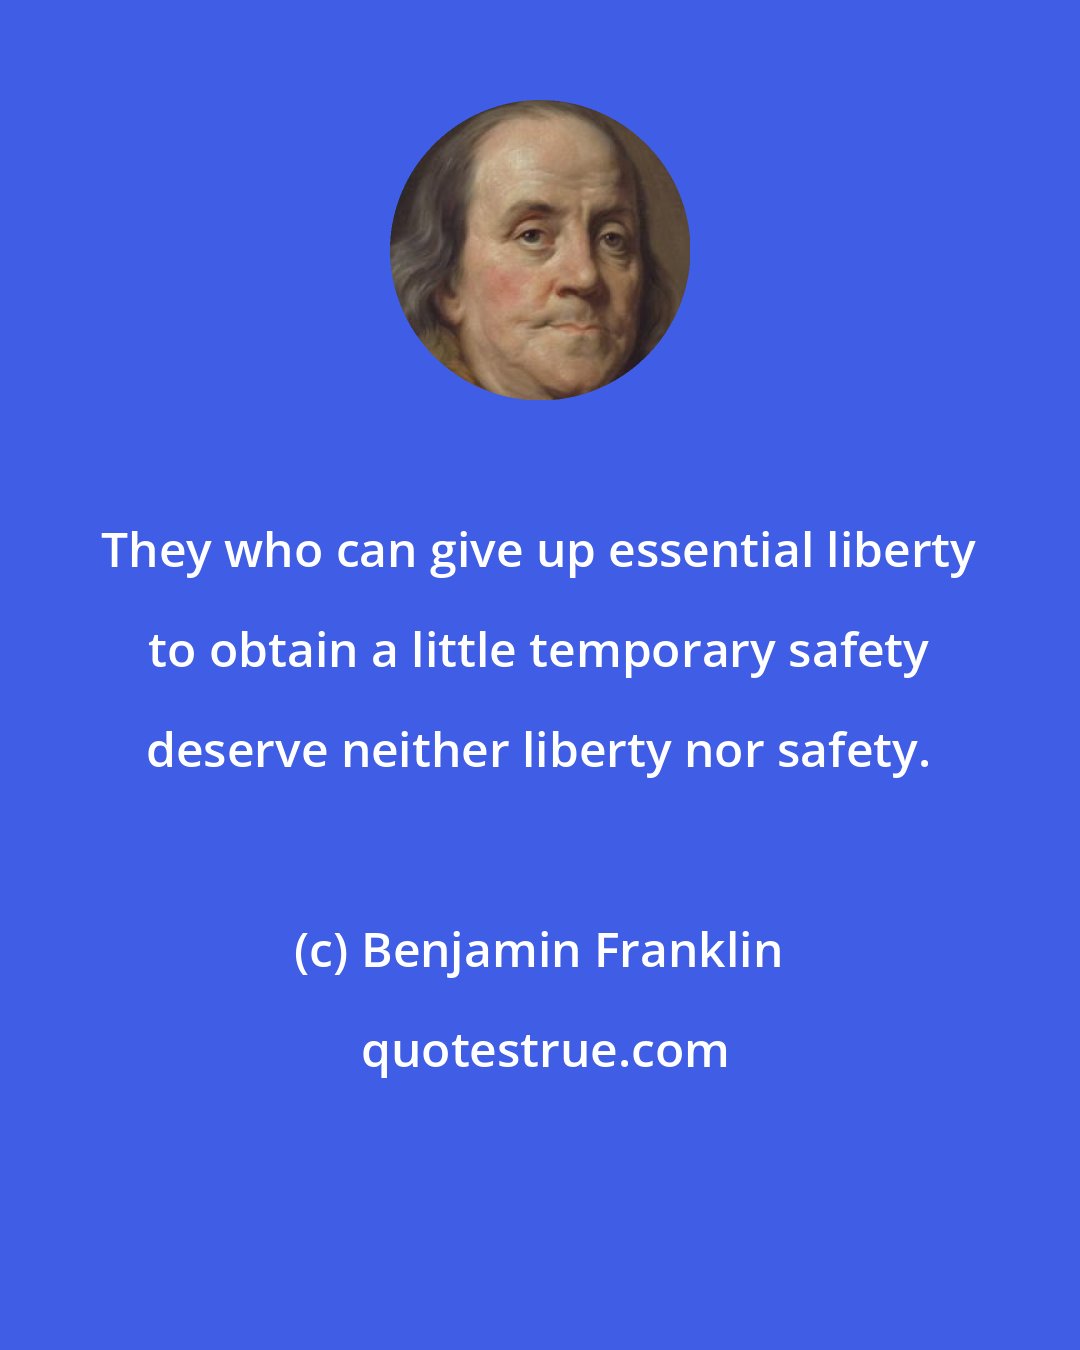 Benjamin Franklin: They who can give up essential liberty to obtain a little temporary safety deserve neither liberty nor safety.